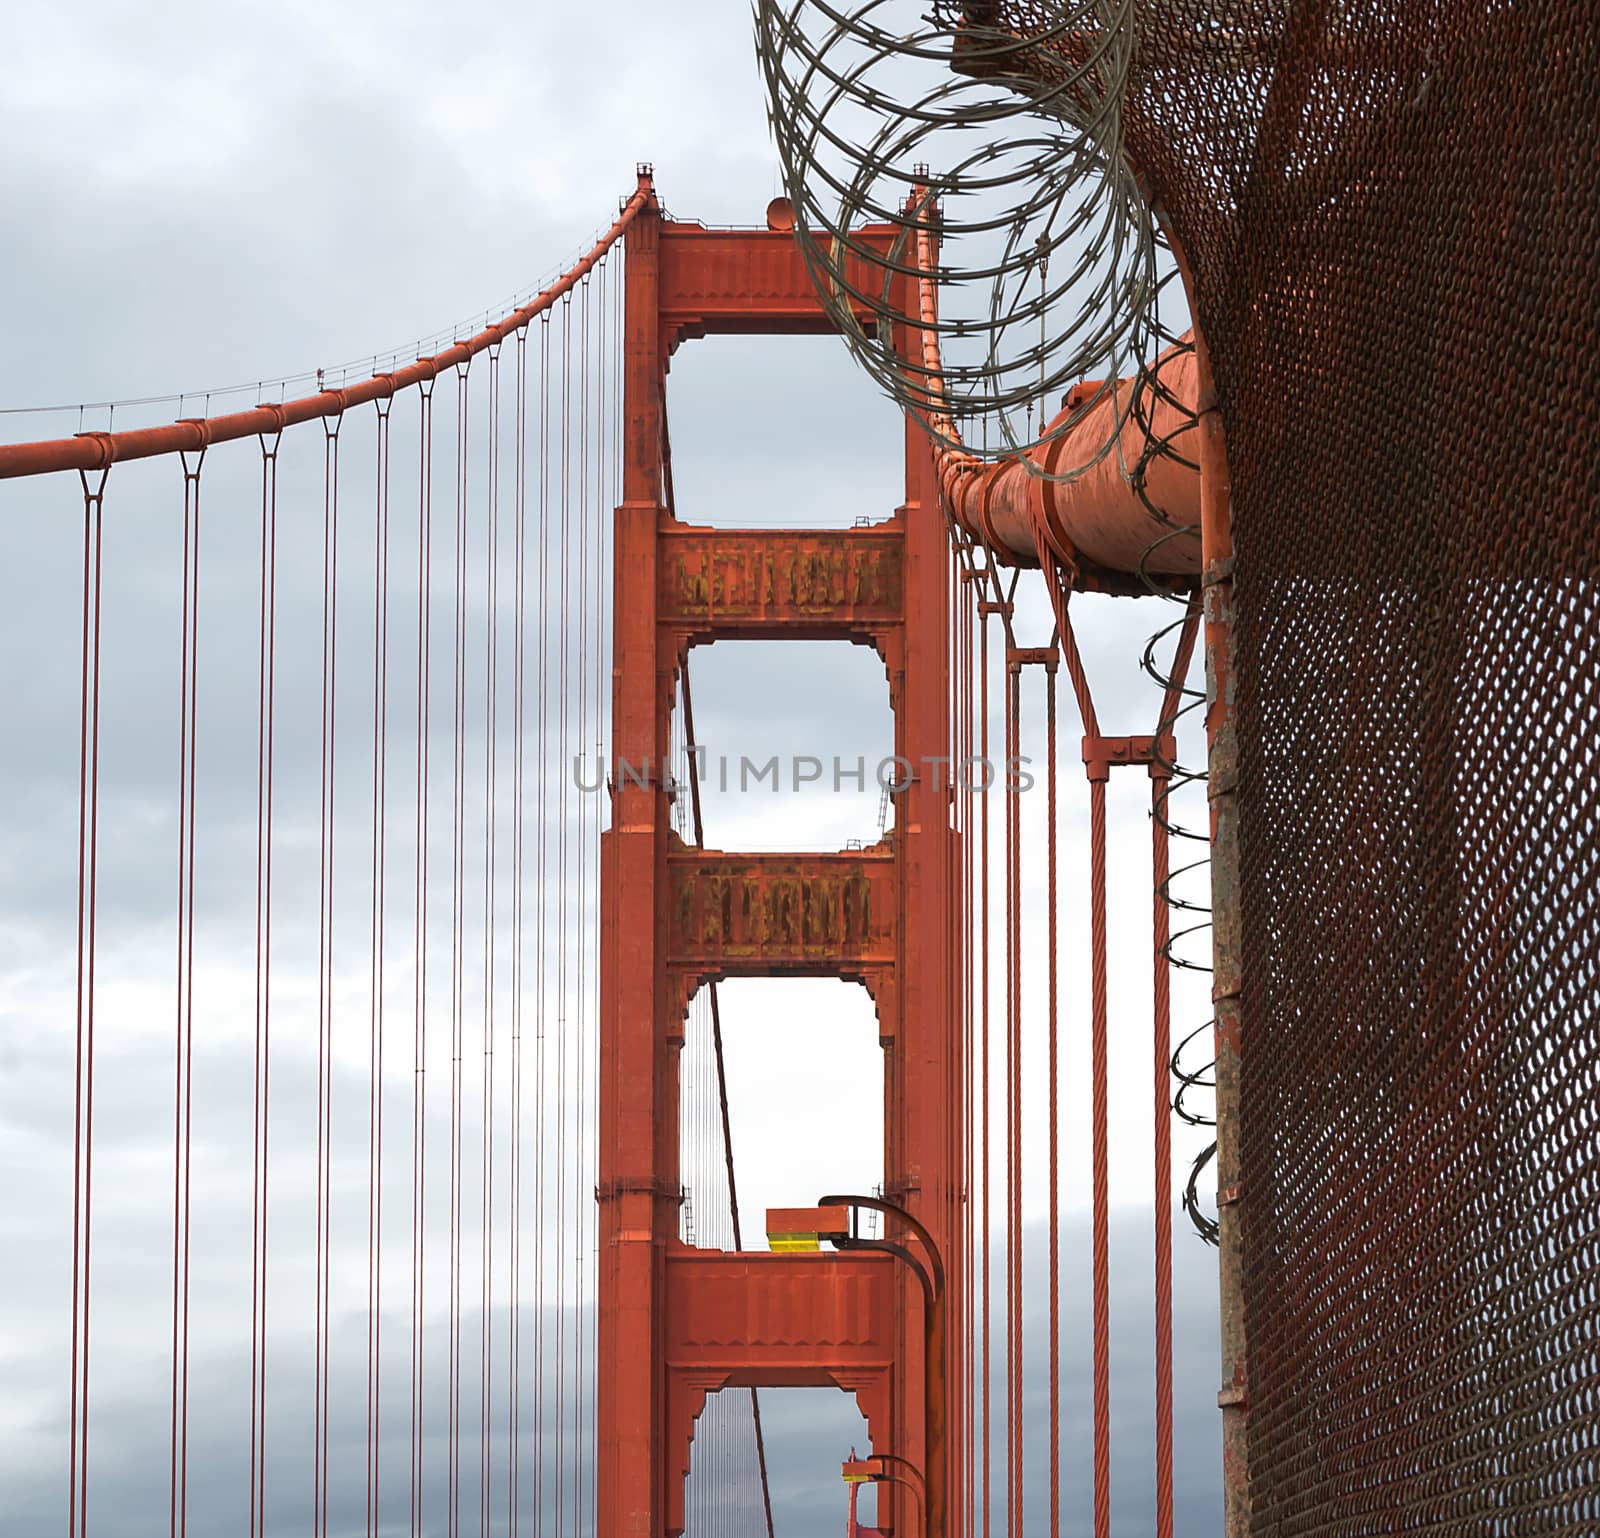 golden gate bridge tower with barbed wire in san francisco